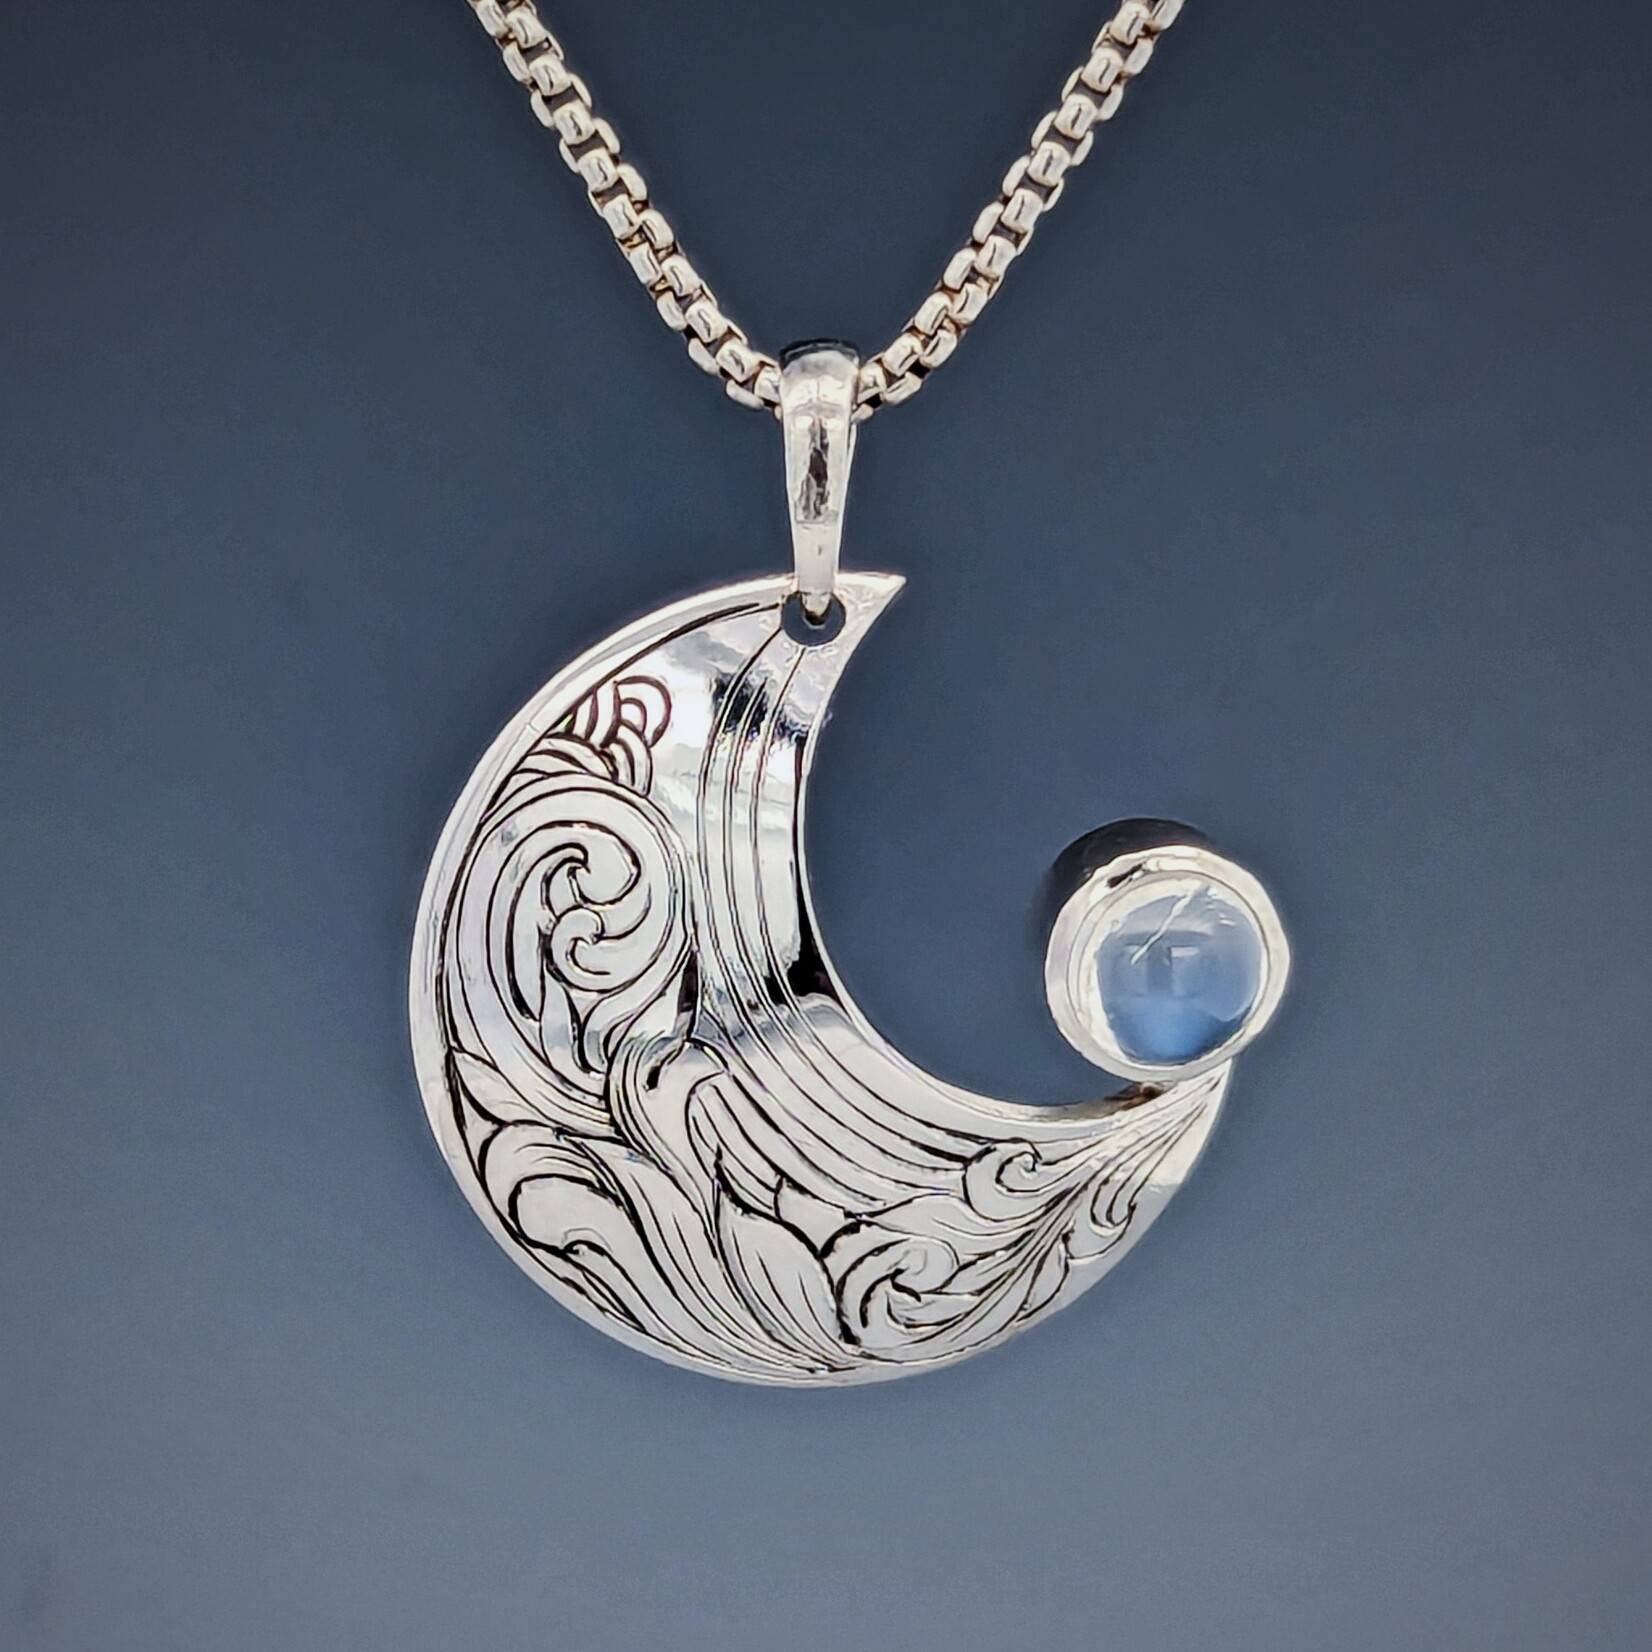 Modern Heirloom® Engraved 23mm Crescent Moon w/ 6mm Moonstone Necklace